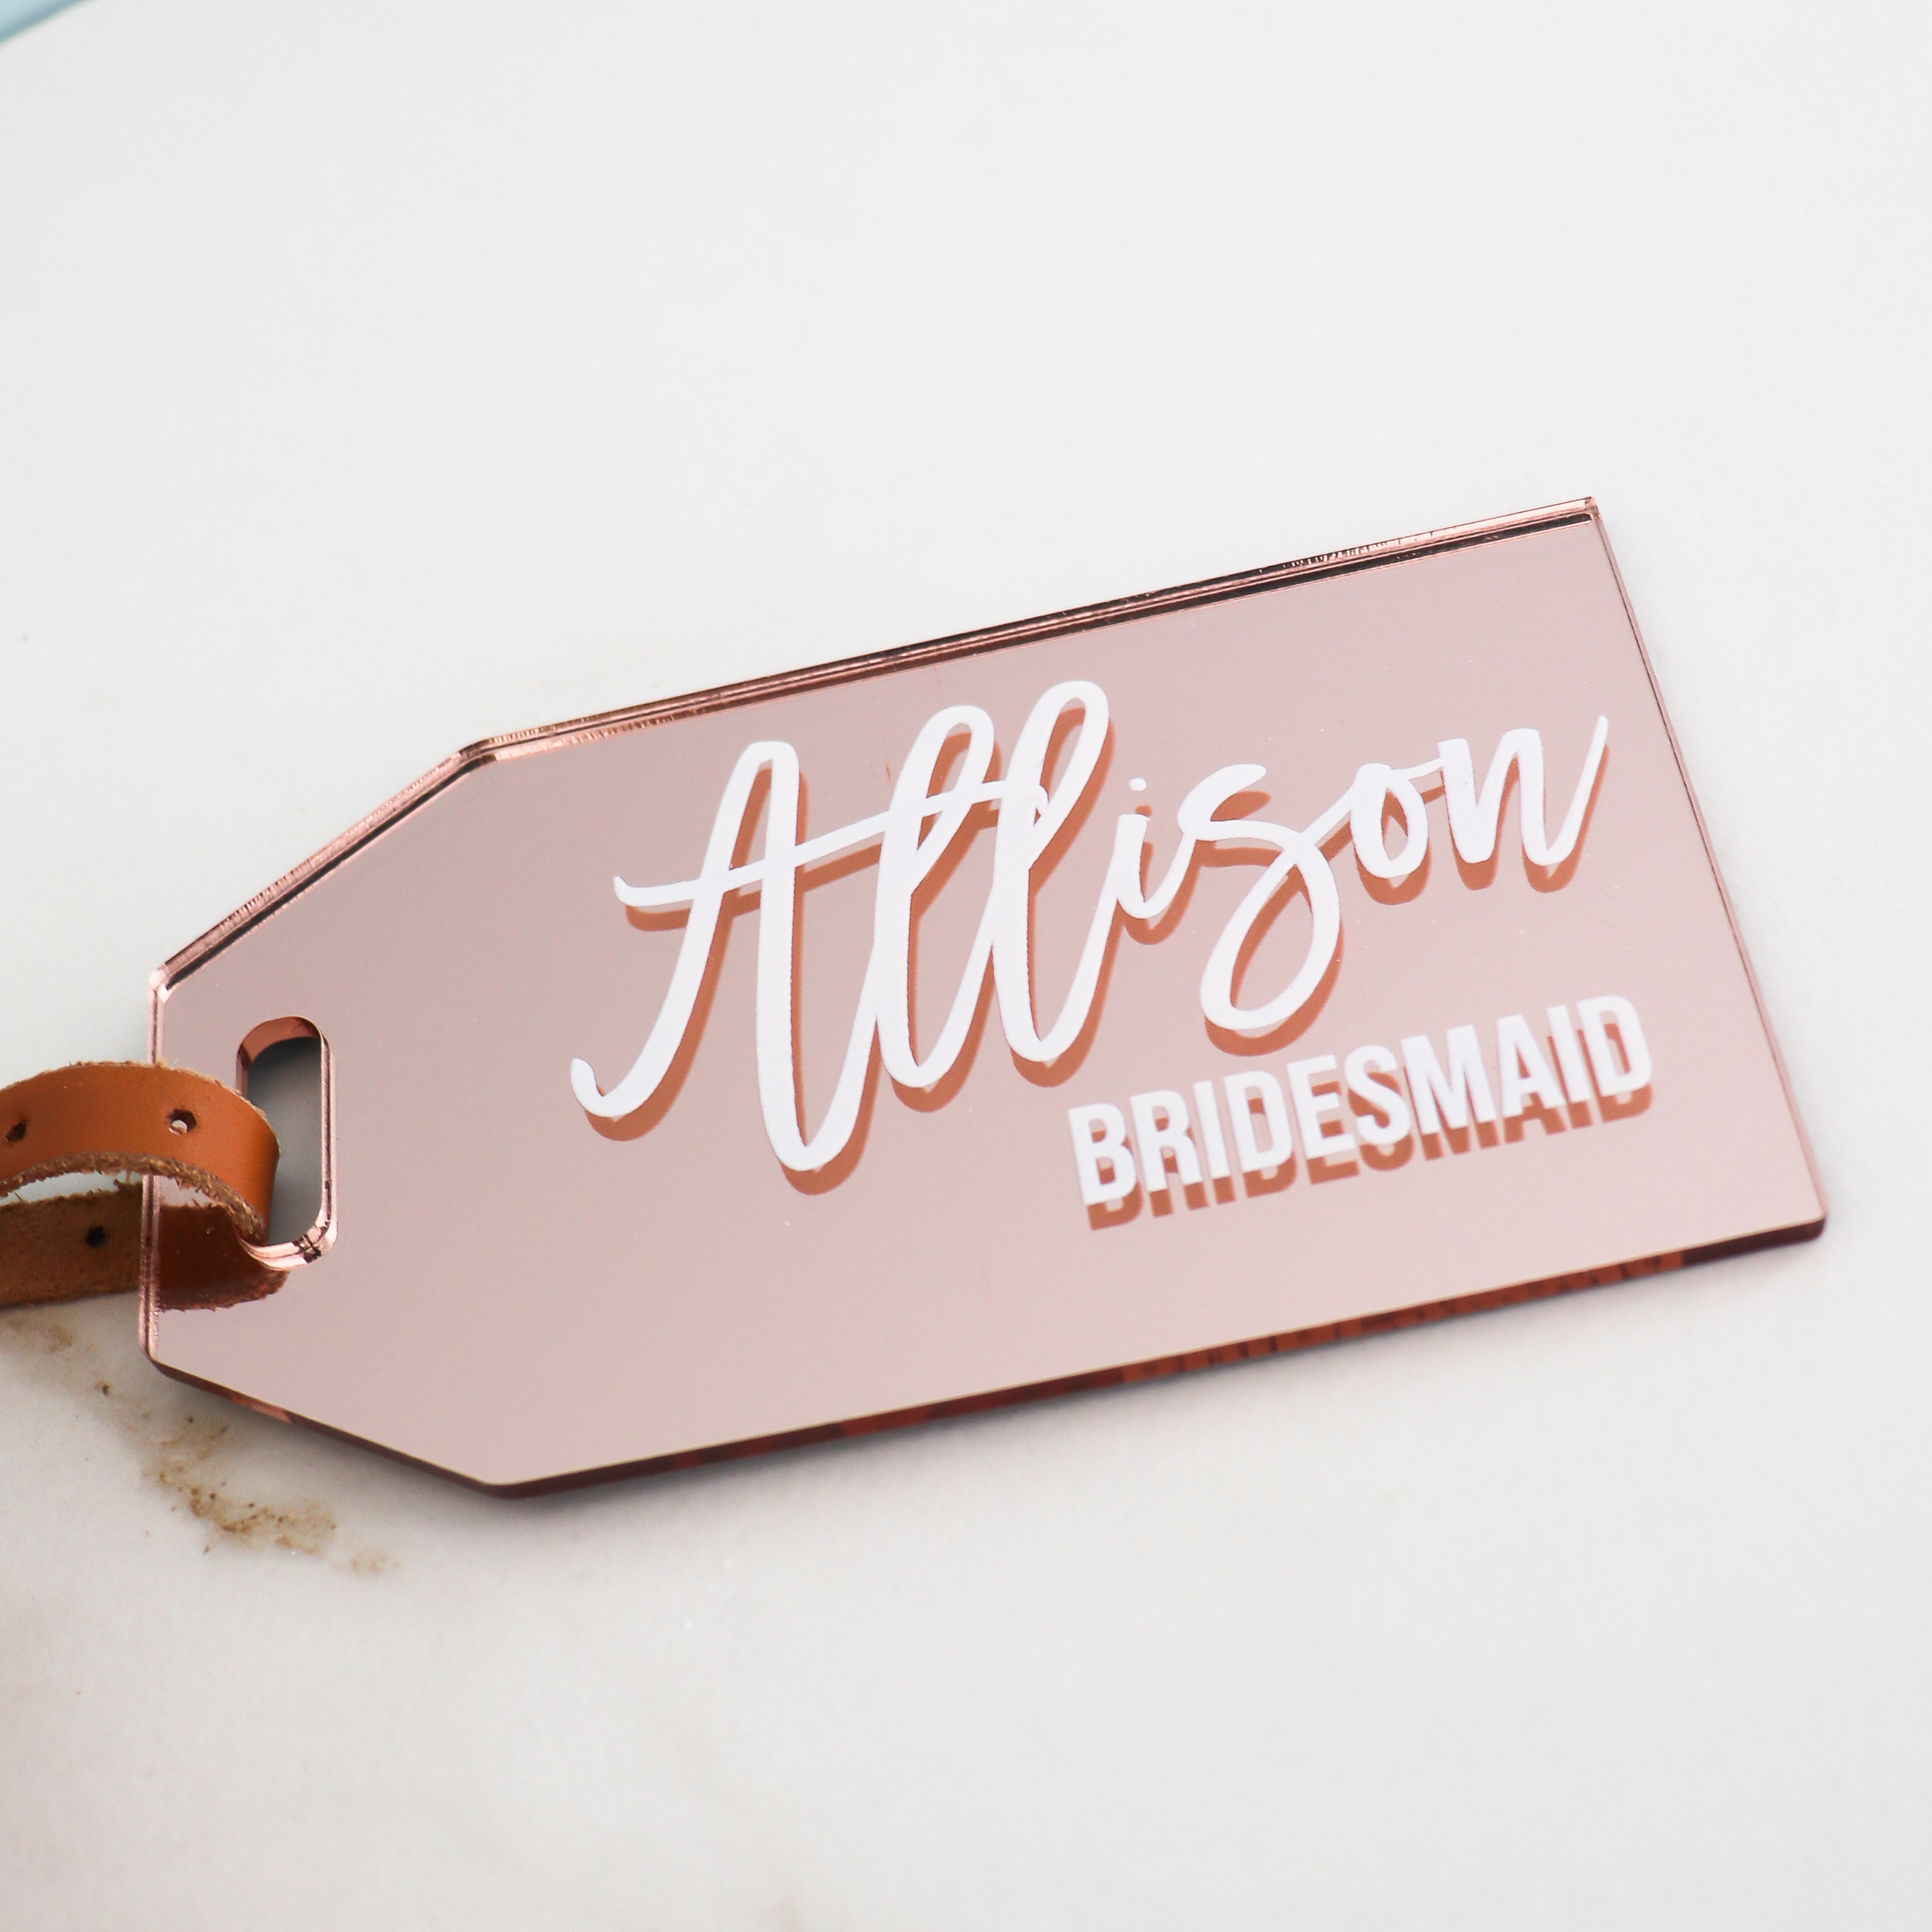 bridesmaid proposal place setting acrylic luggage tag bridesmaid gift seating  chart Personalized luggage tag acrylic place card names Tassen & portemonnees Bagage & Reizen Bagagelabels 